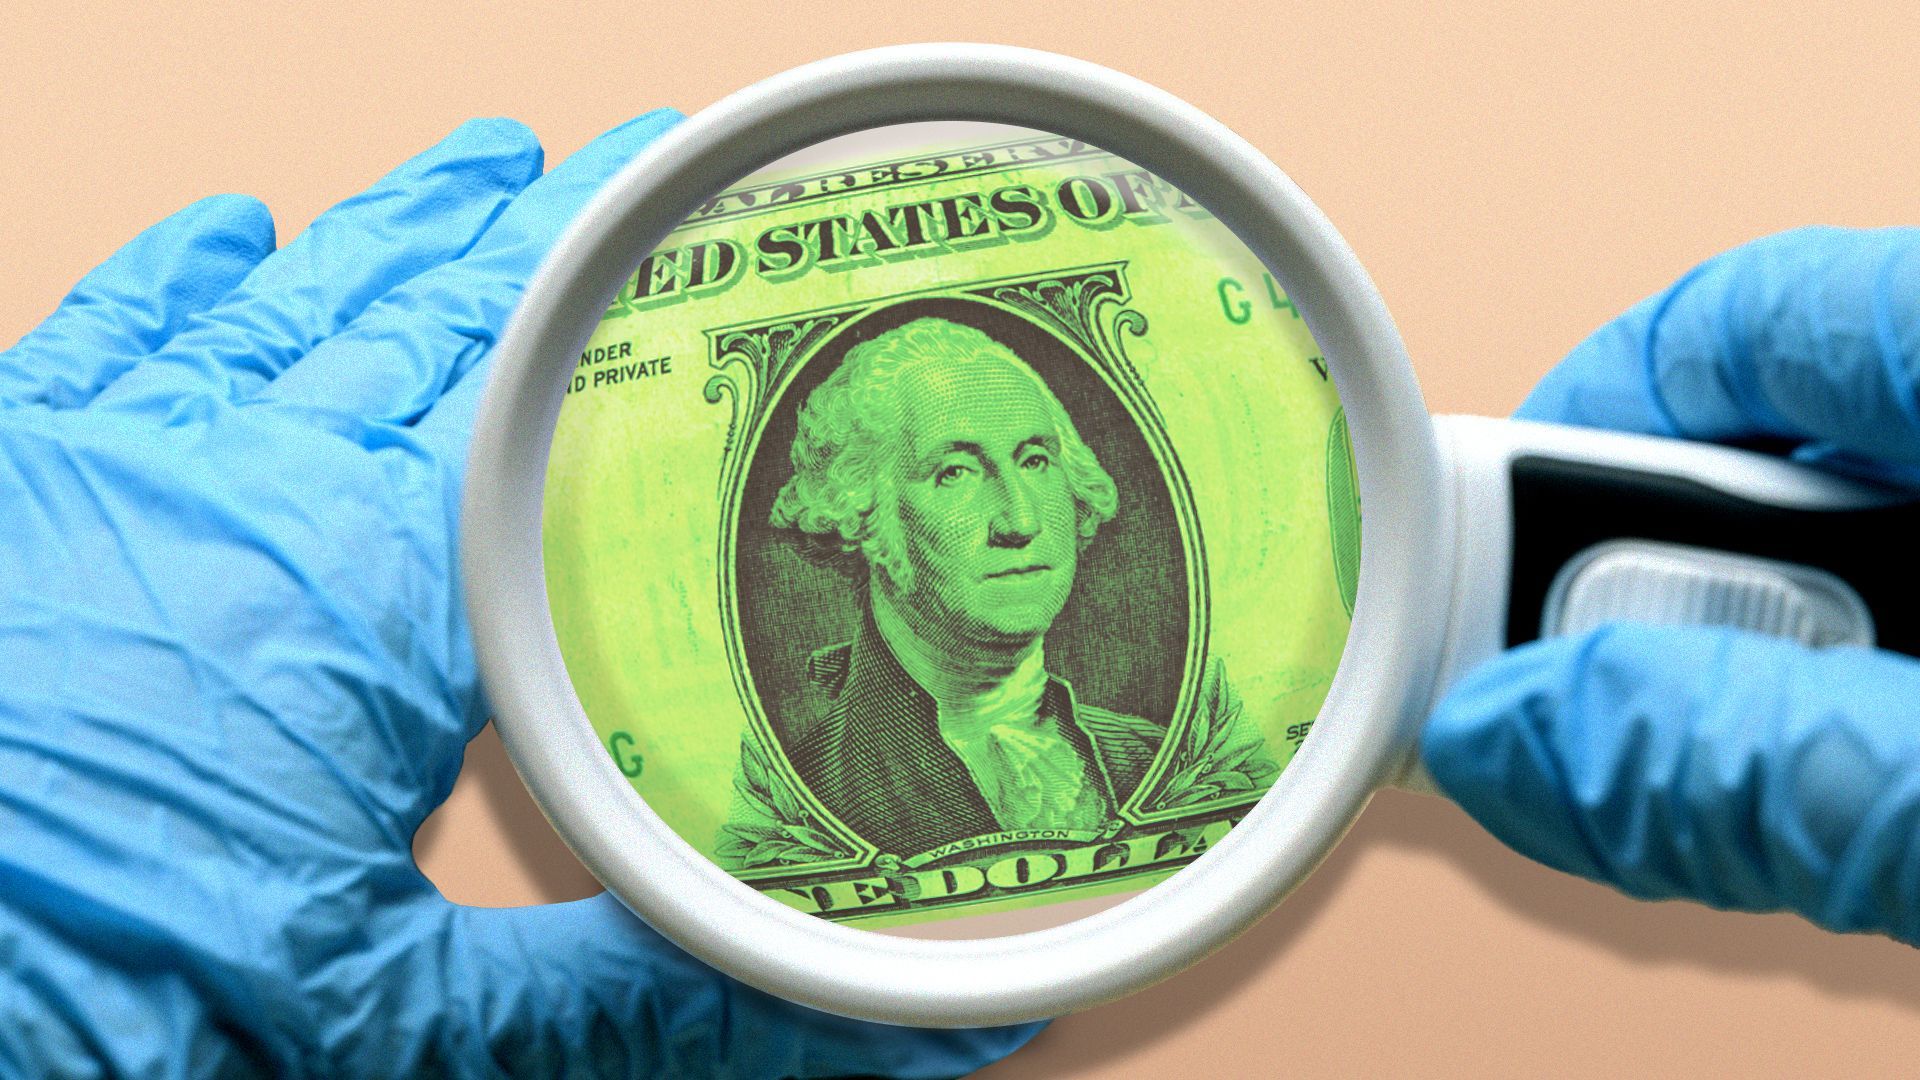 Illustration of a doctor's hands holding a large magnifying glass over a dollar bill.